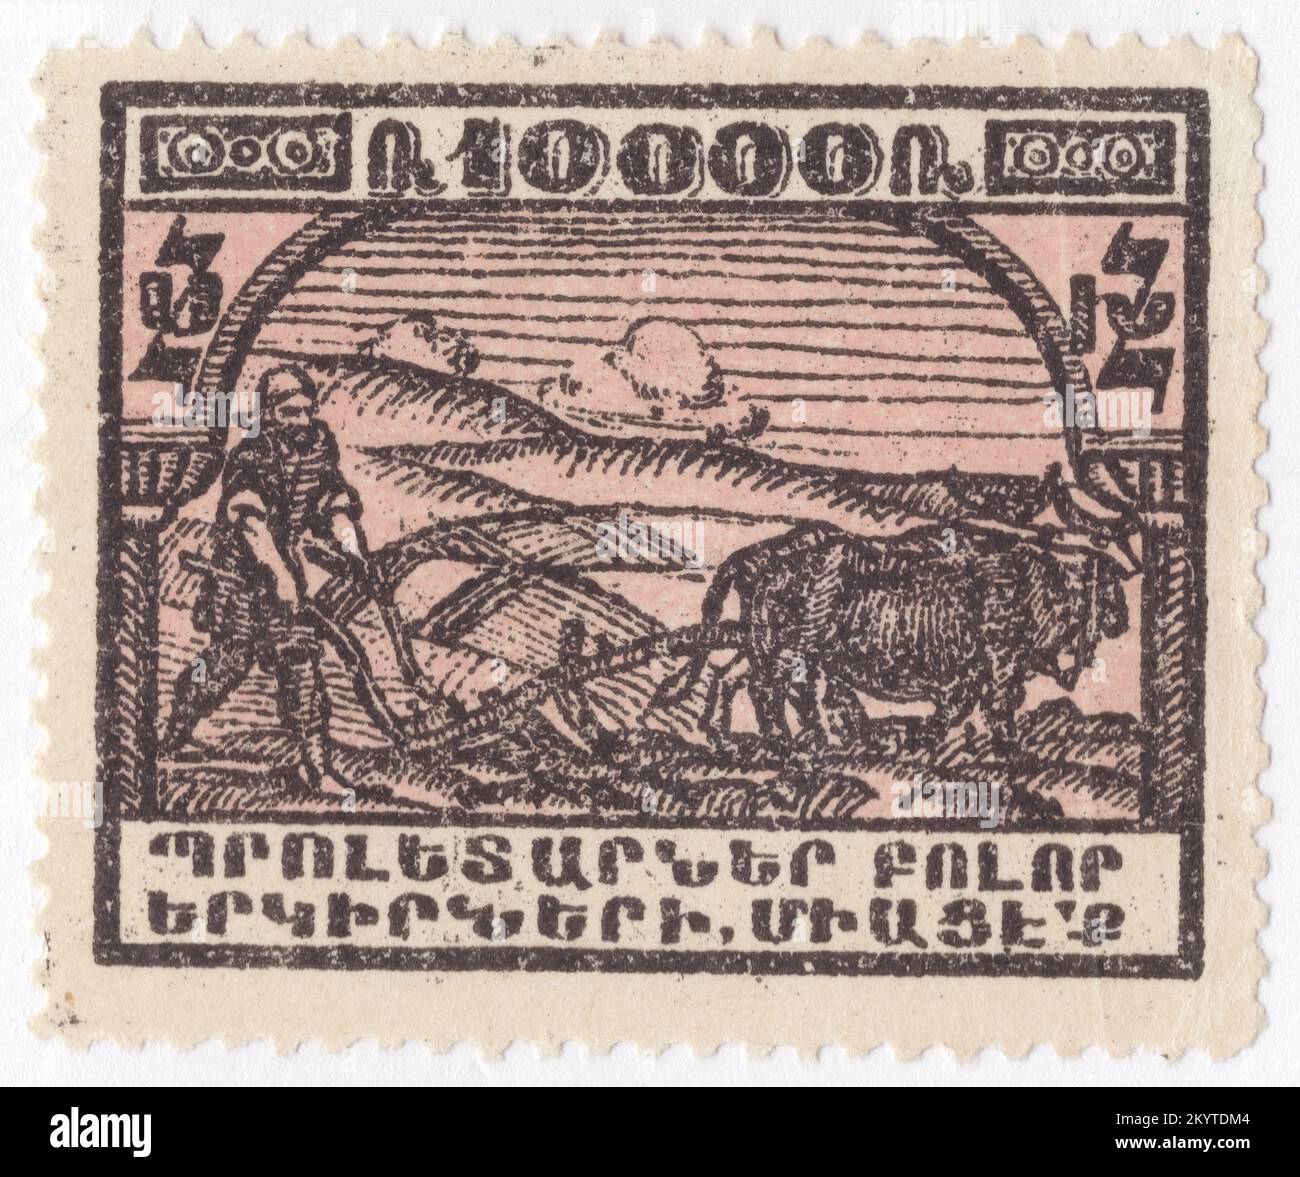 ARMENIA - 1922: An 10000 rubles black and pale rose postage stamp depicting Plowing. Officially the Republic of Armenia, is a landlocked country in the Armenian Highlands of Western Asia. It is a part of the Caucasus region; and is bordered by Turkey to the west, Georgia to the north, the Lachin corridor (under a Russian occupation force) and Azerbaijan to the east, and Iran and the Azerbaijani exclave of Nakhchivan to the south. Yerevan is the capital, largest city and the financial center. Armenia is a unitary, multi-party, democratic nation-state with an ancient cultural heritage Stock Photo